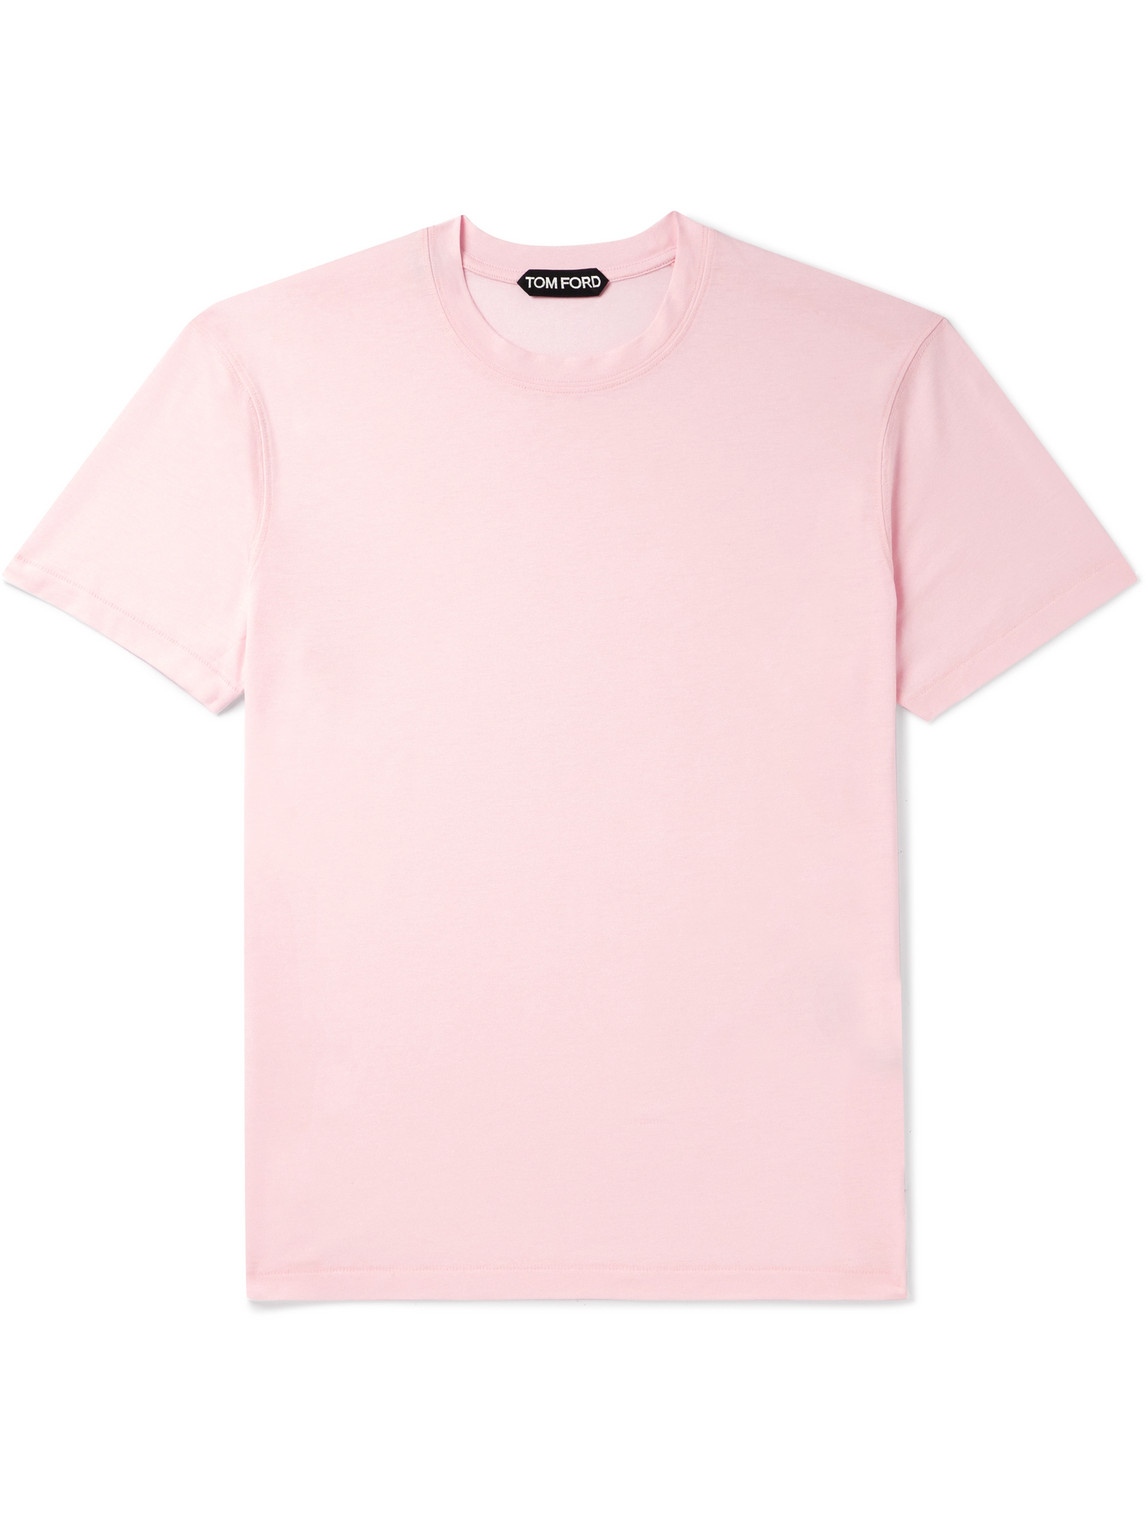 TOM FORD SLIM-FIT LYOCELL AND COTTON-BLEND JERSEY T-SHIRT